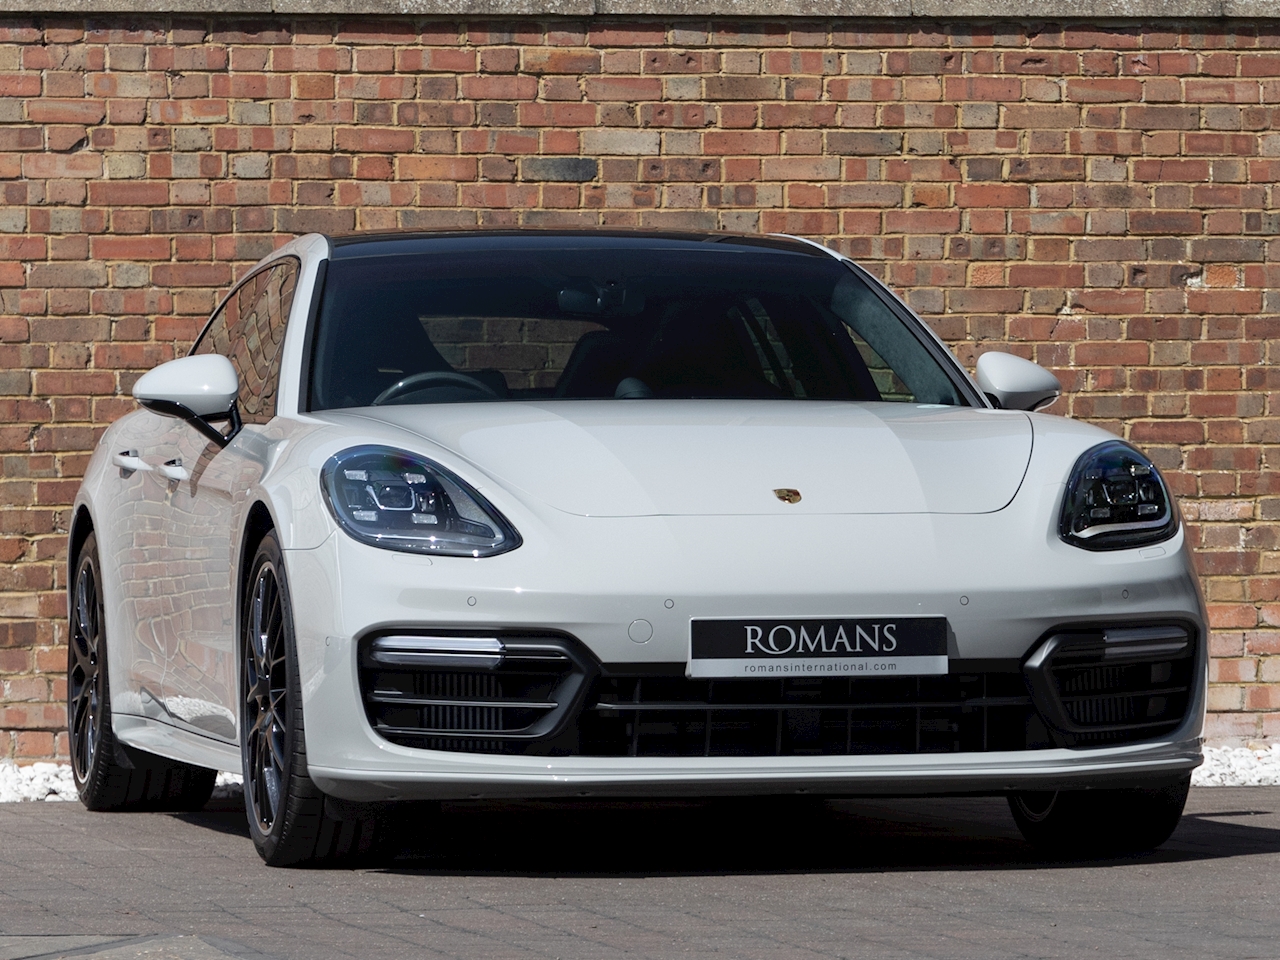 2023 Porsche Panamera  News reviews picture galleries and videos  The  Car Guide